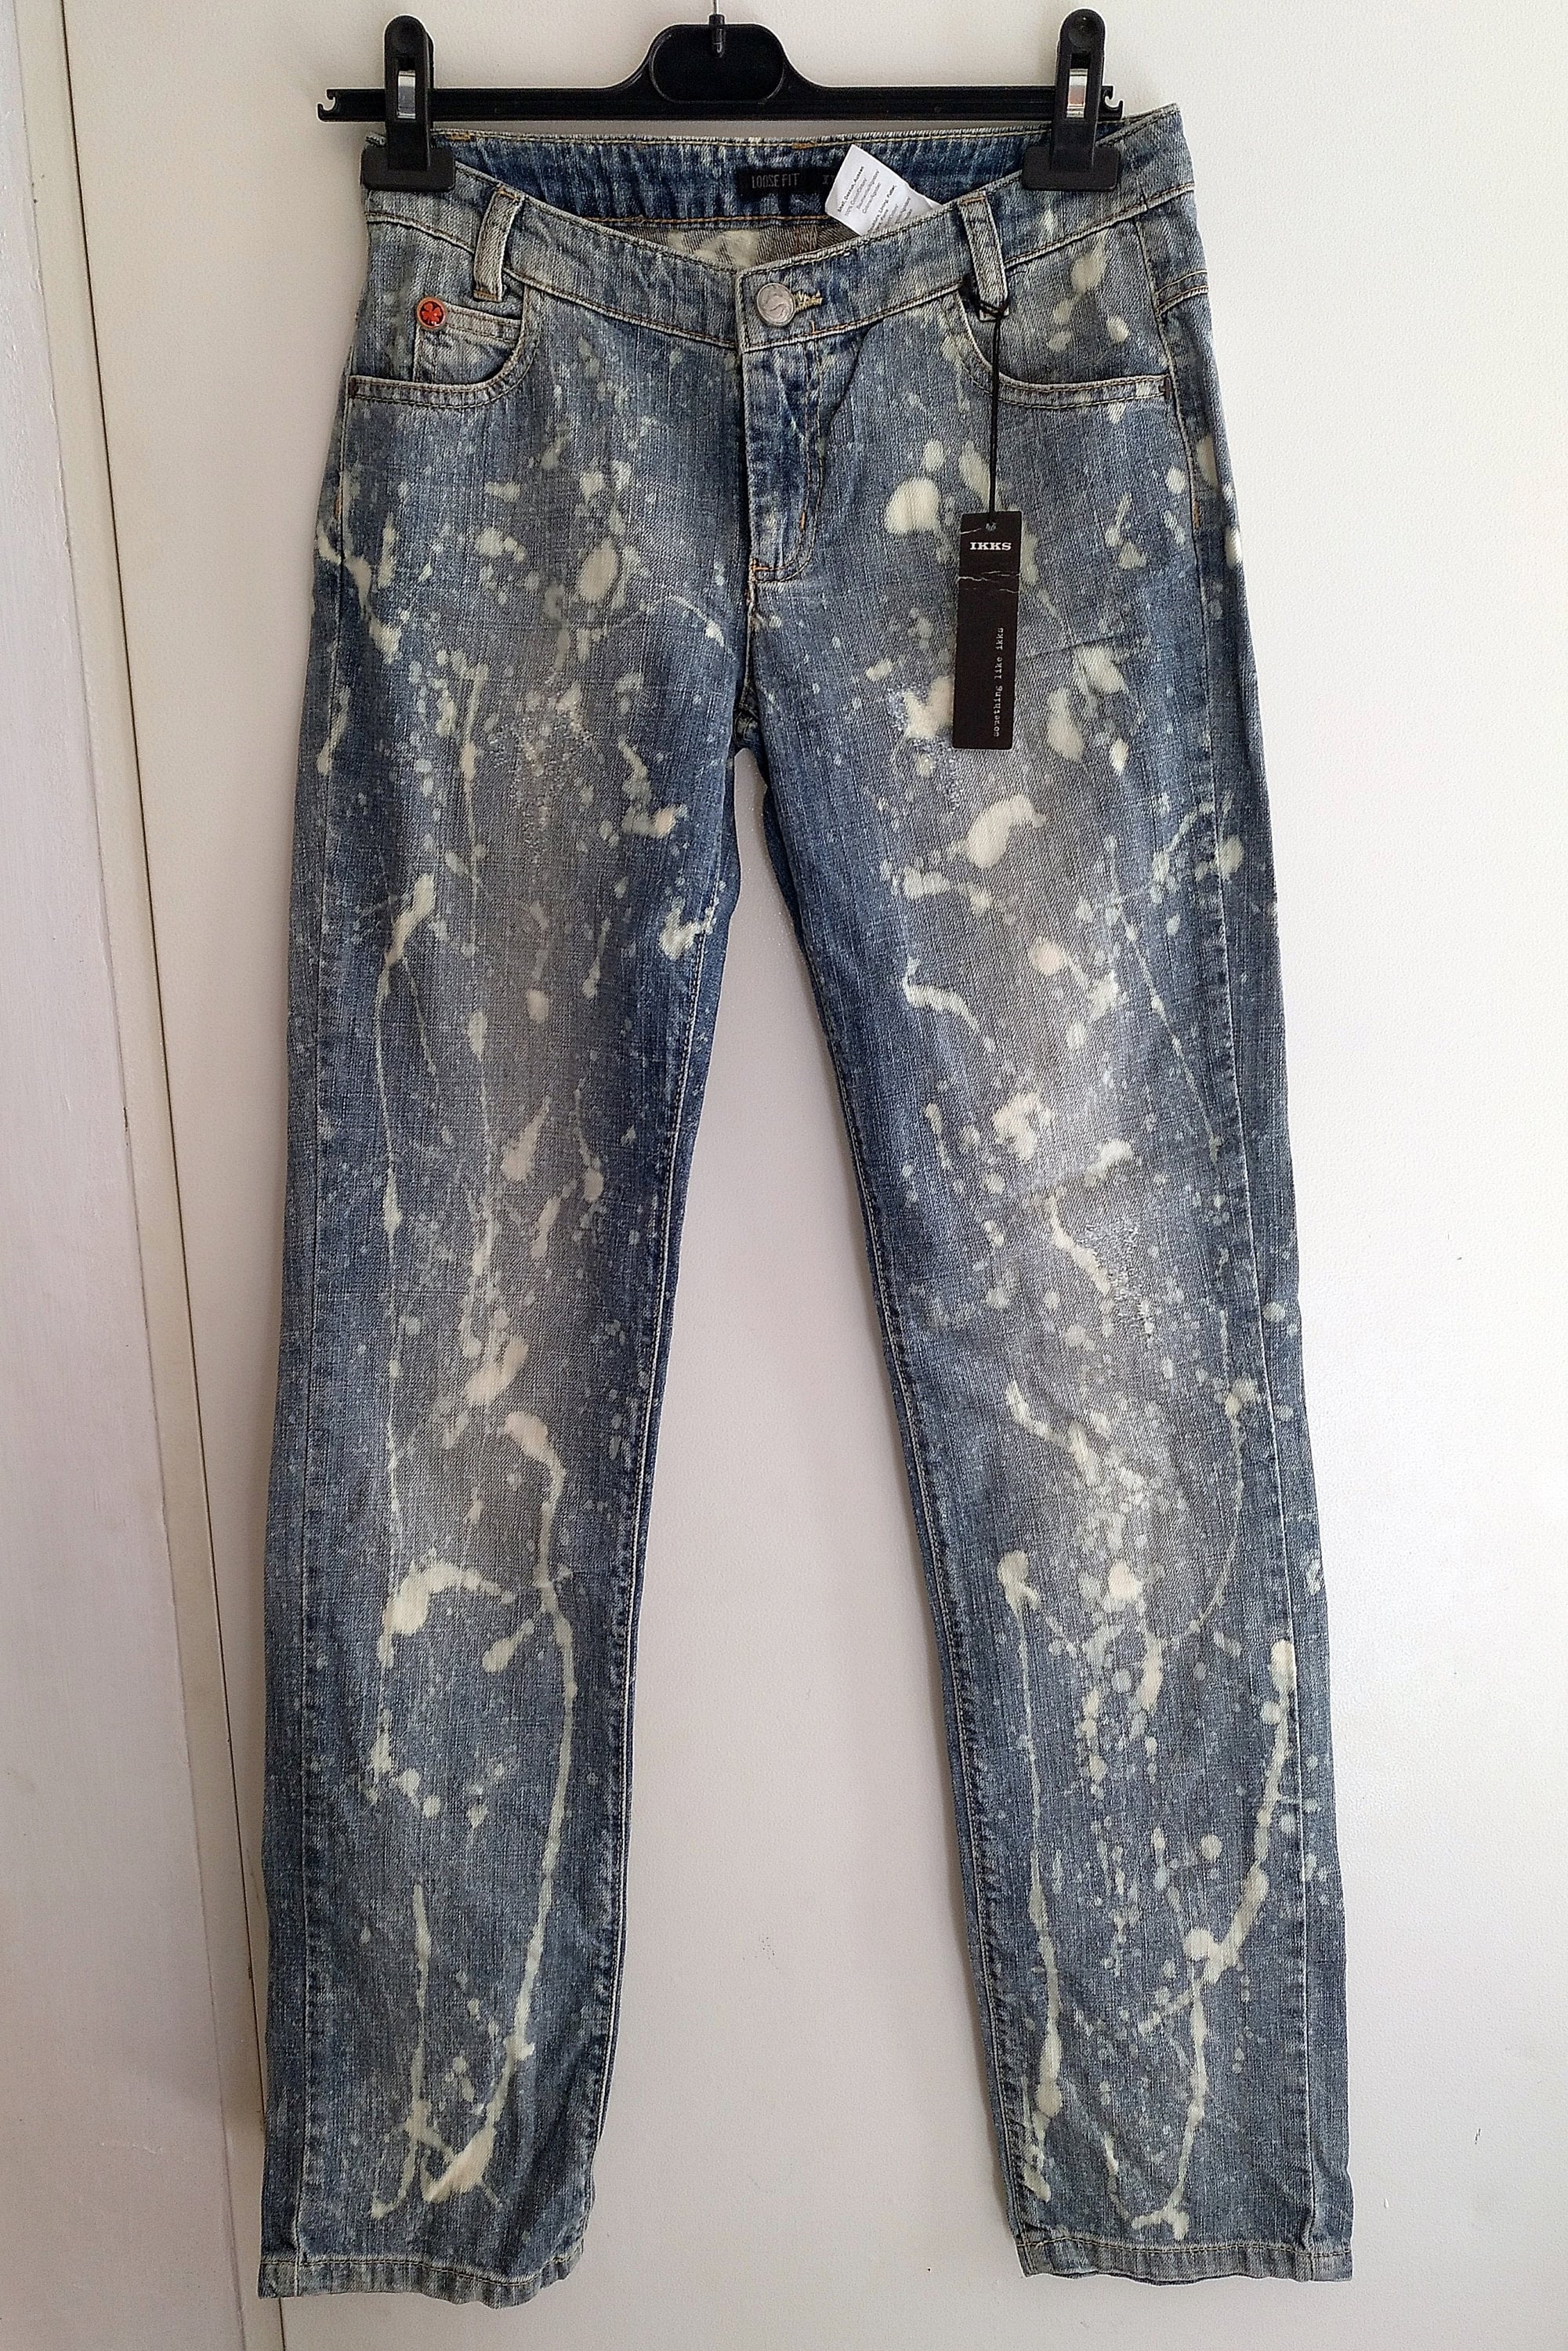 Tie Dye Jeans IKKS LIMITED EDITION Vintage Reworked Jeans - Etsy